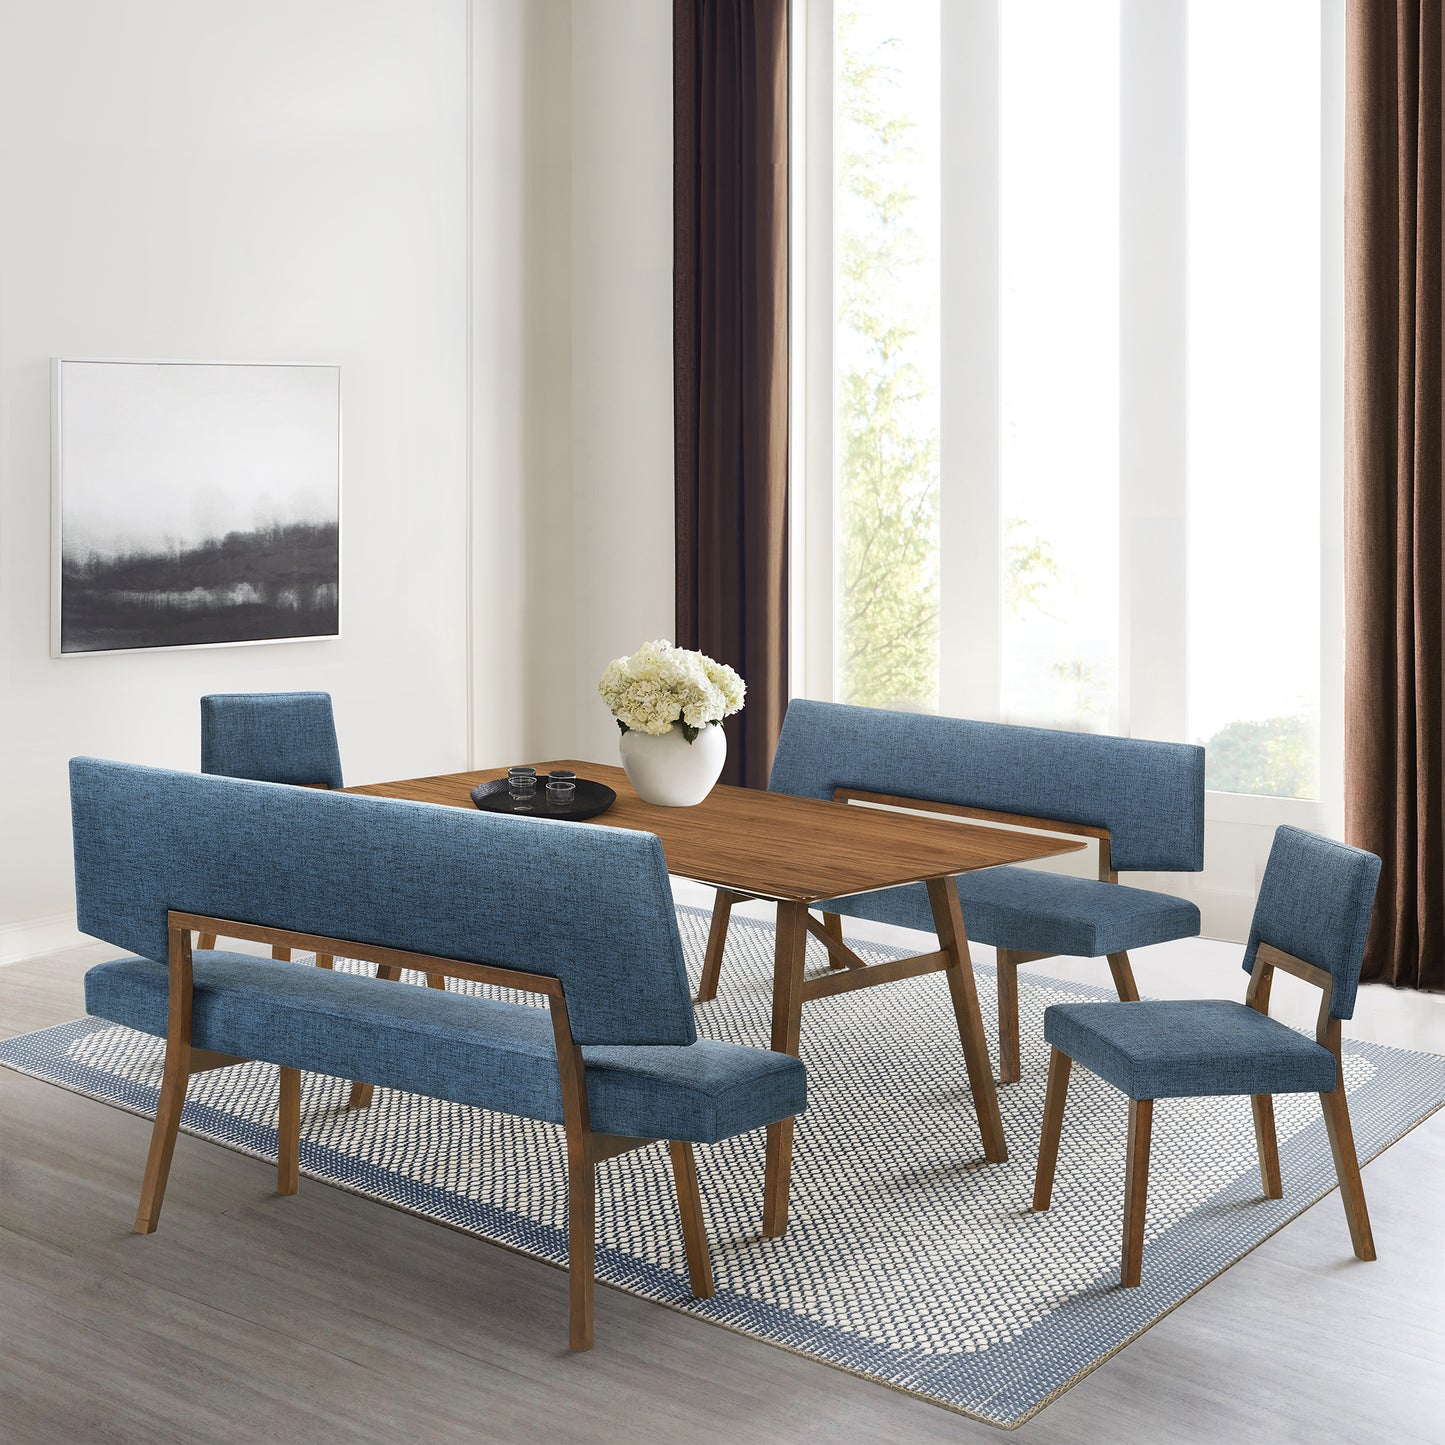 Channell 5 Piece Walnut Wood Dining Table Set with Benches in Blue Fabric